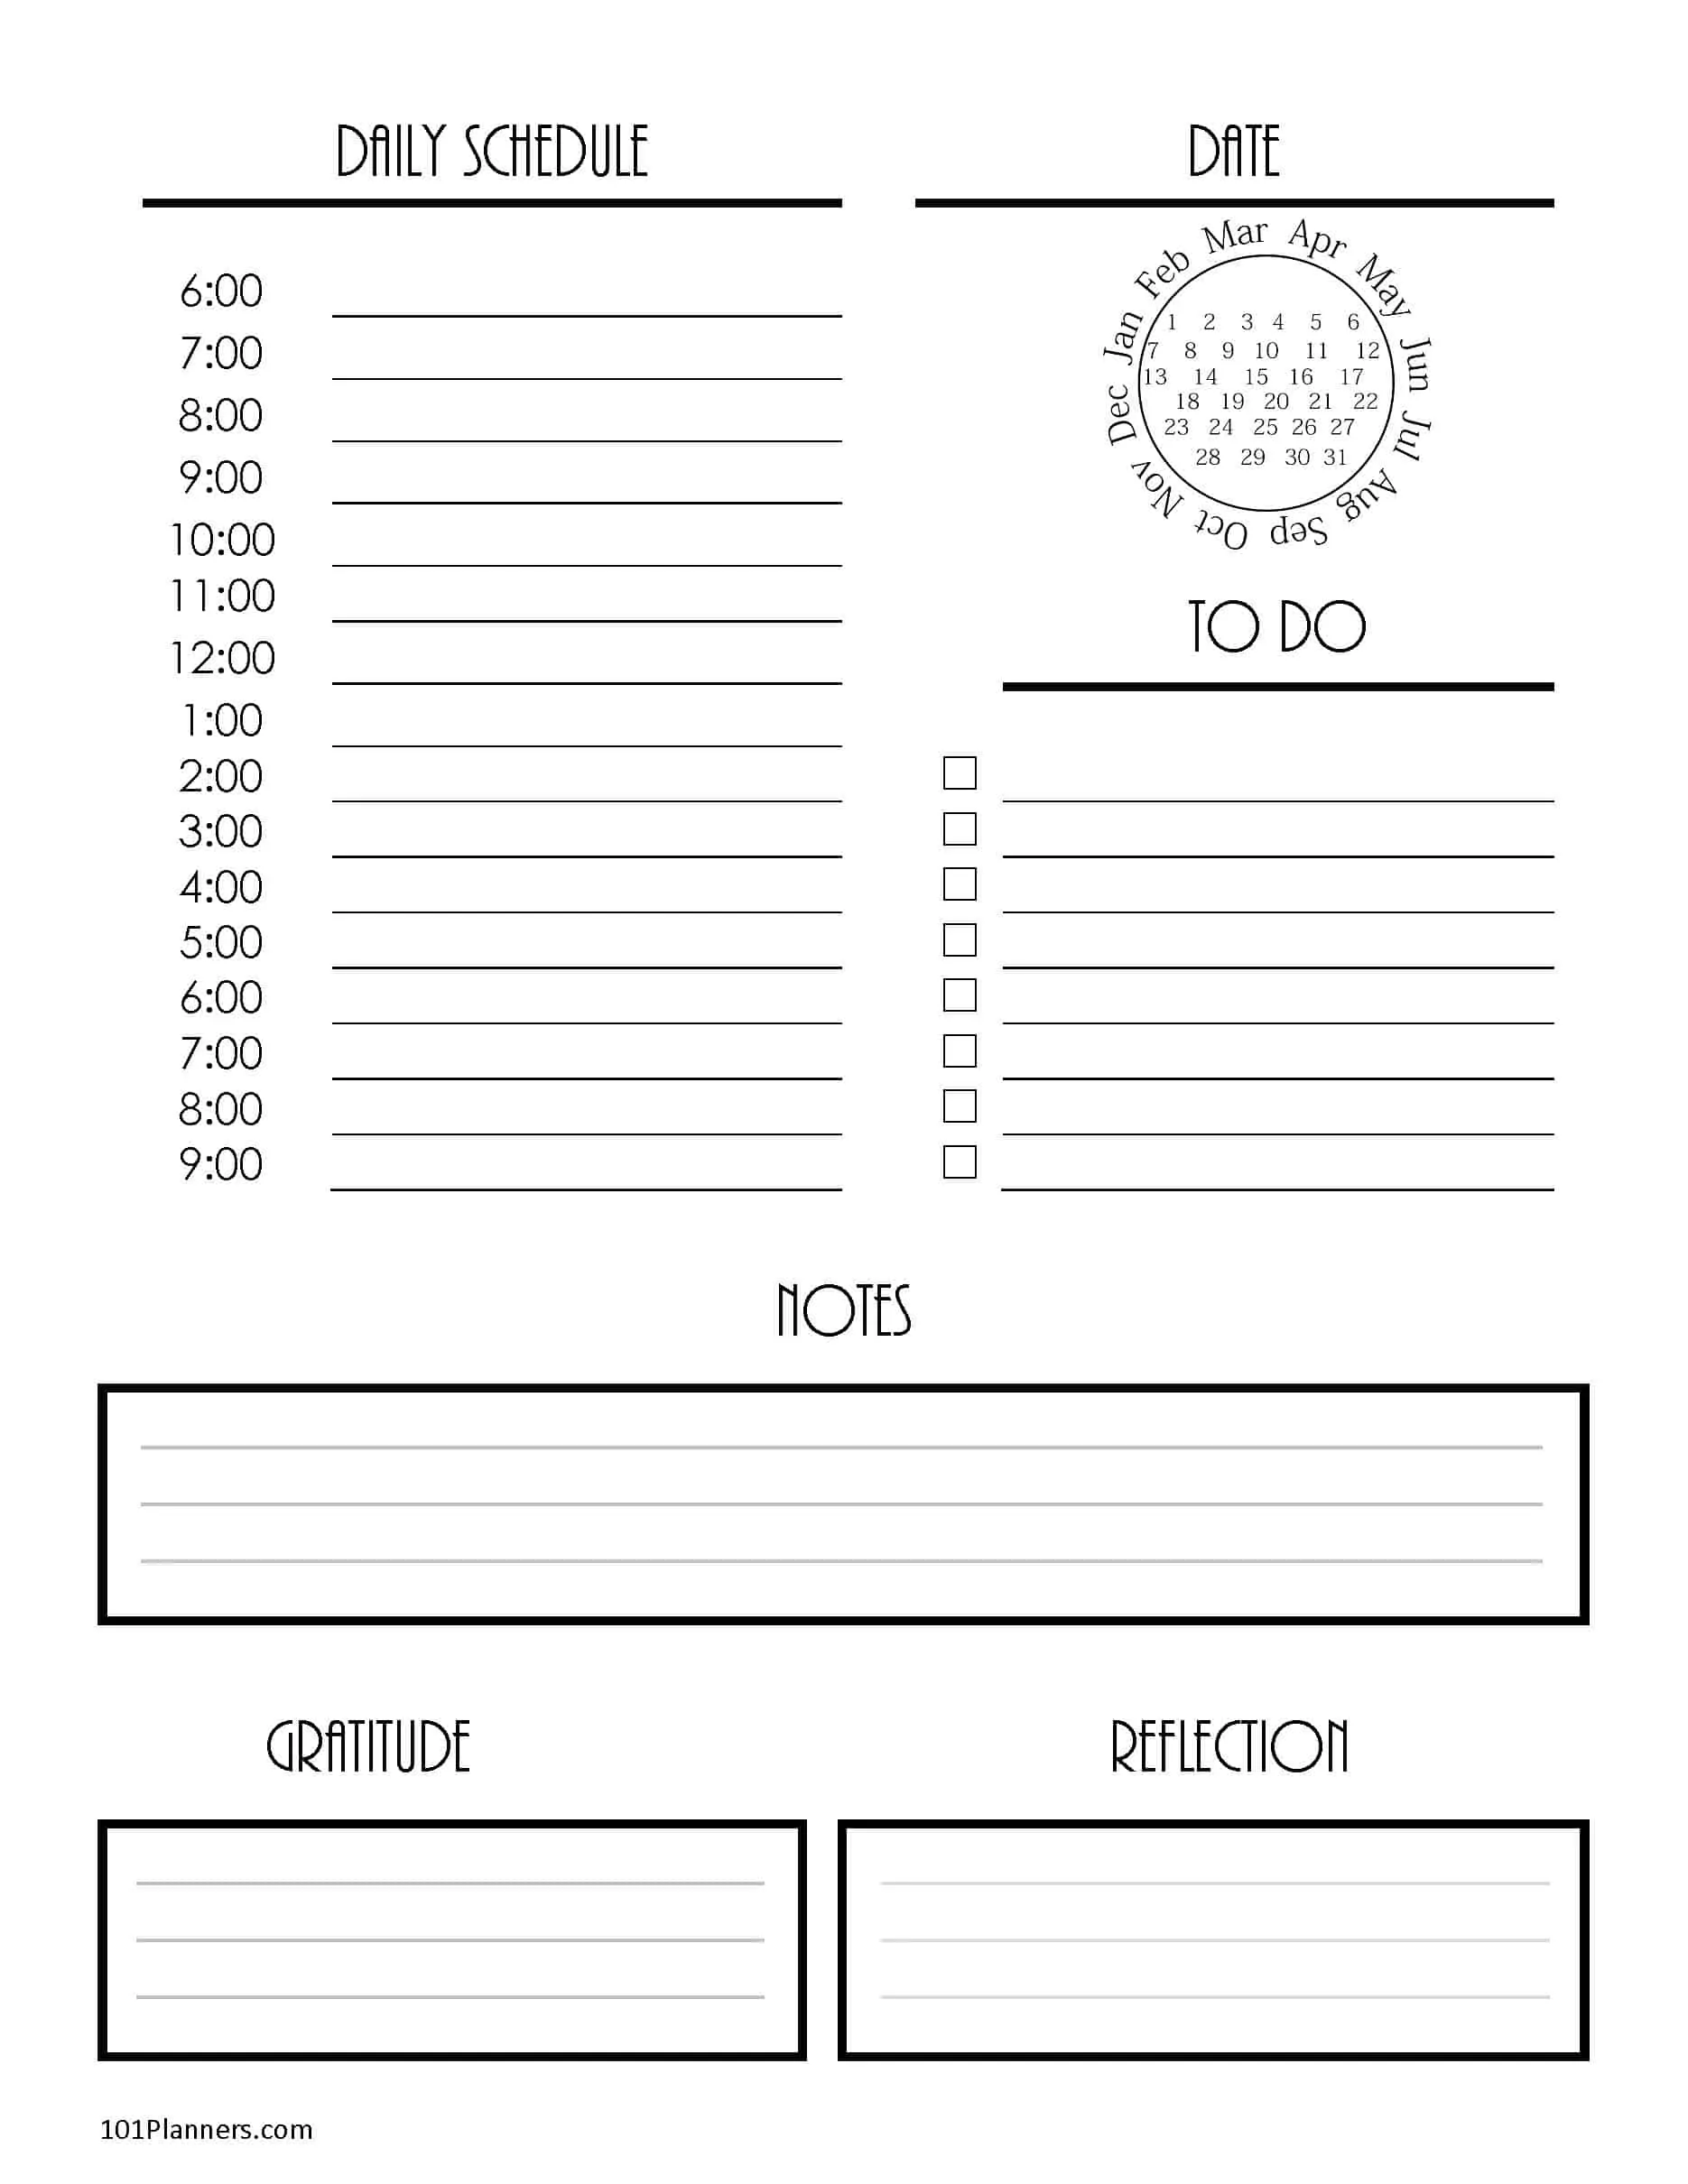 Free Daily Planner Page Printable